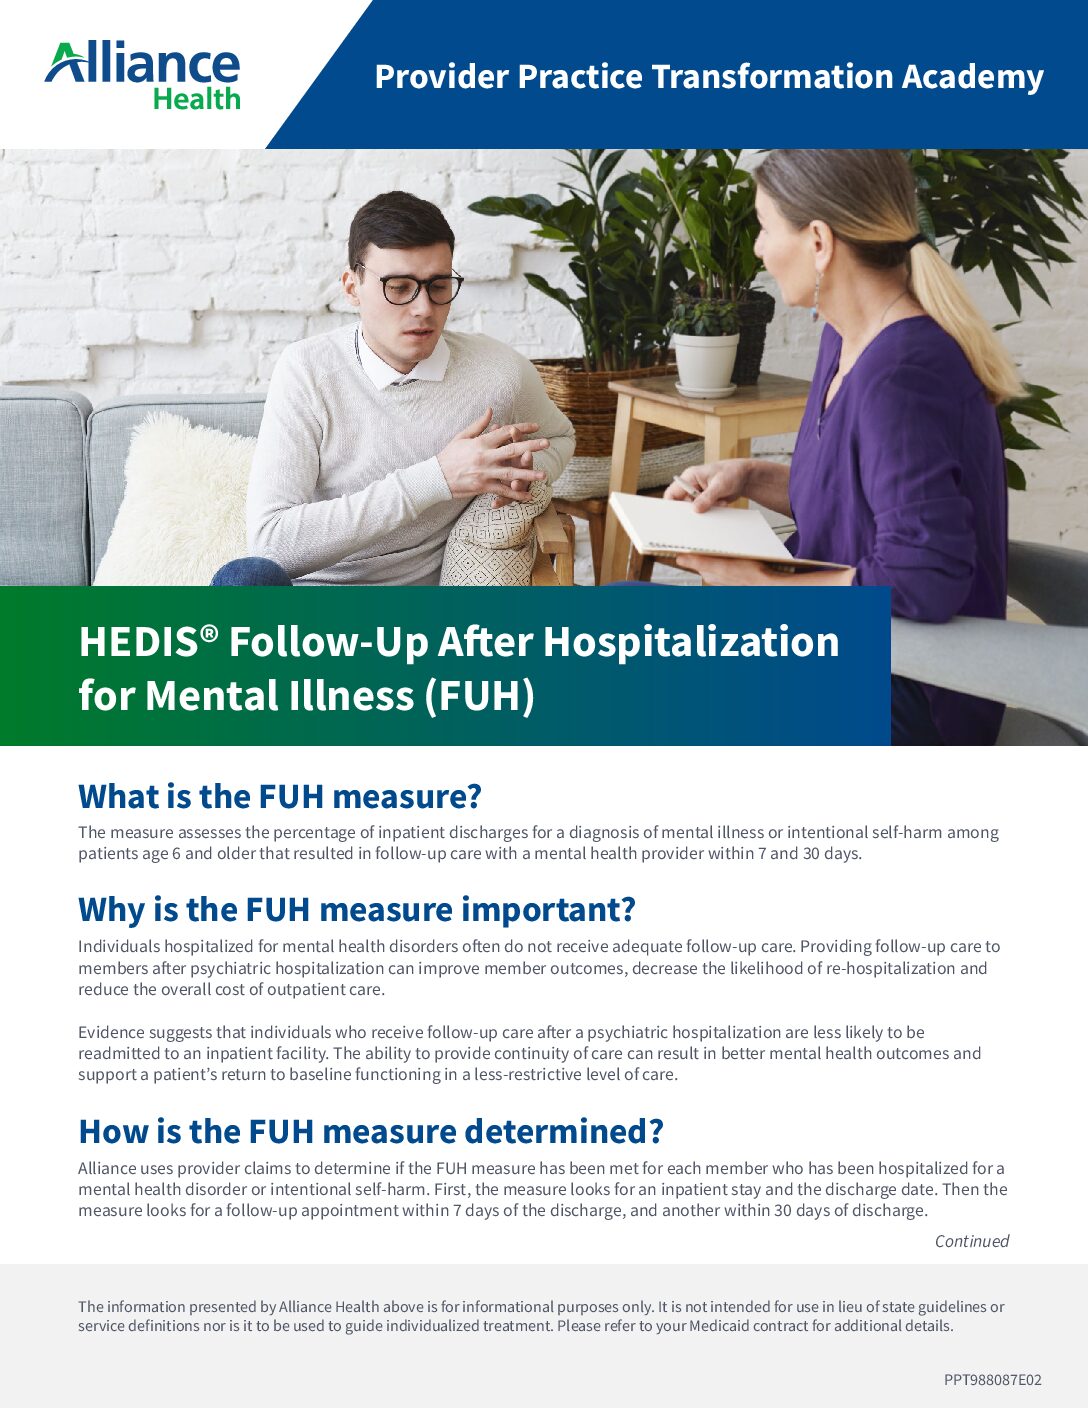 HEDIS® Follow-Up After Hospitalization for Mental Illness (FUH)